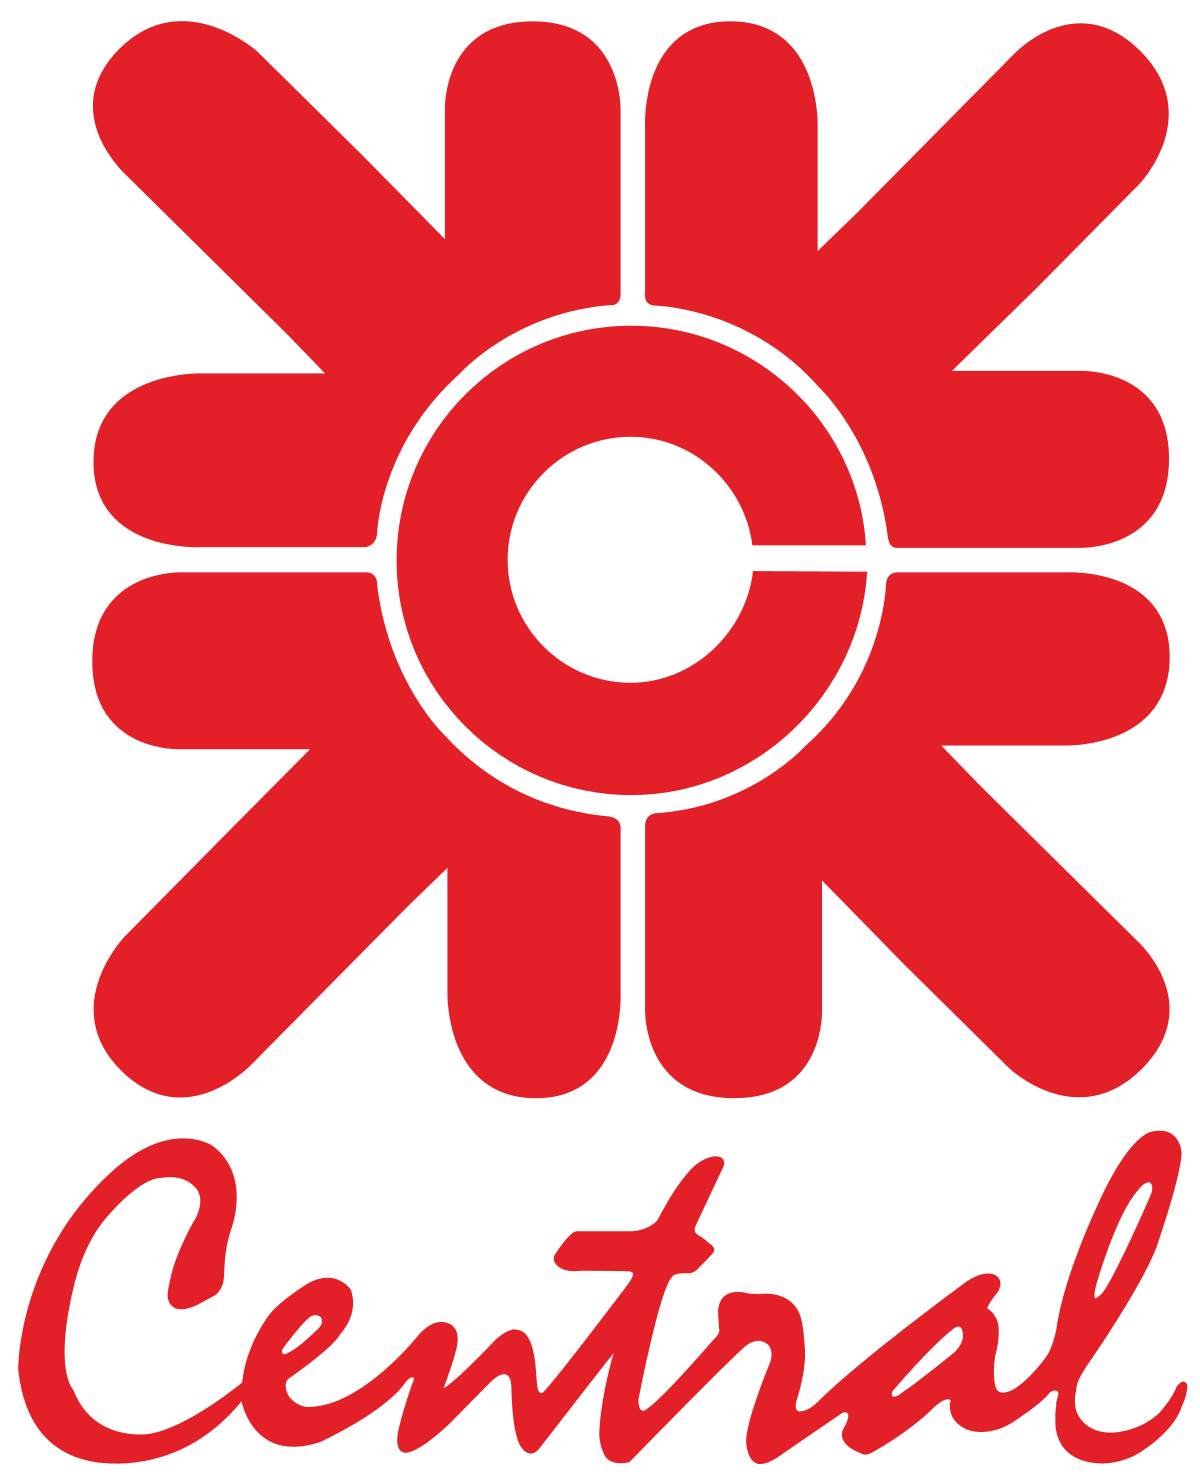 Central Logo - Central Department Store